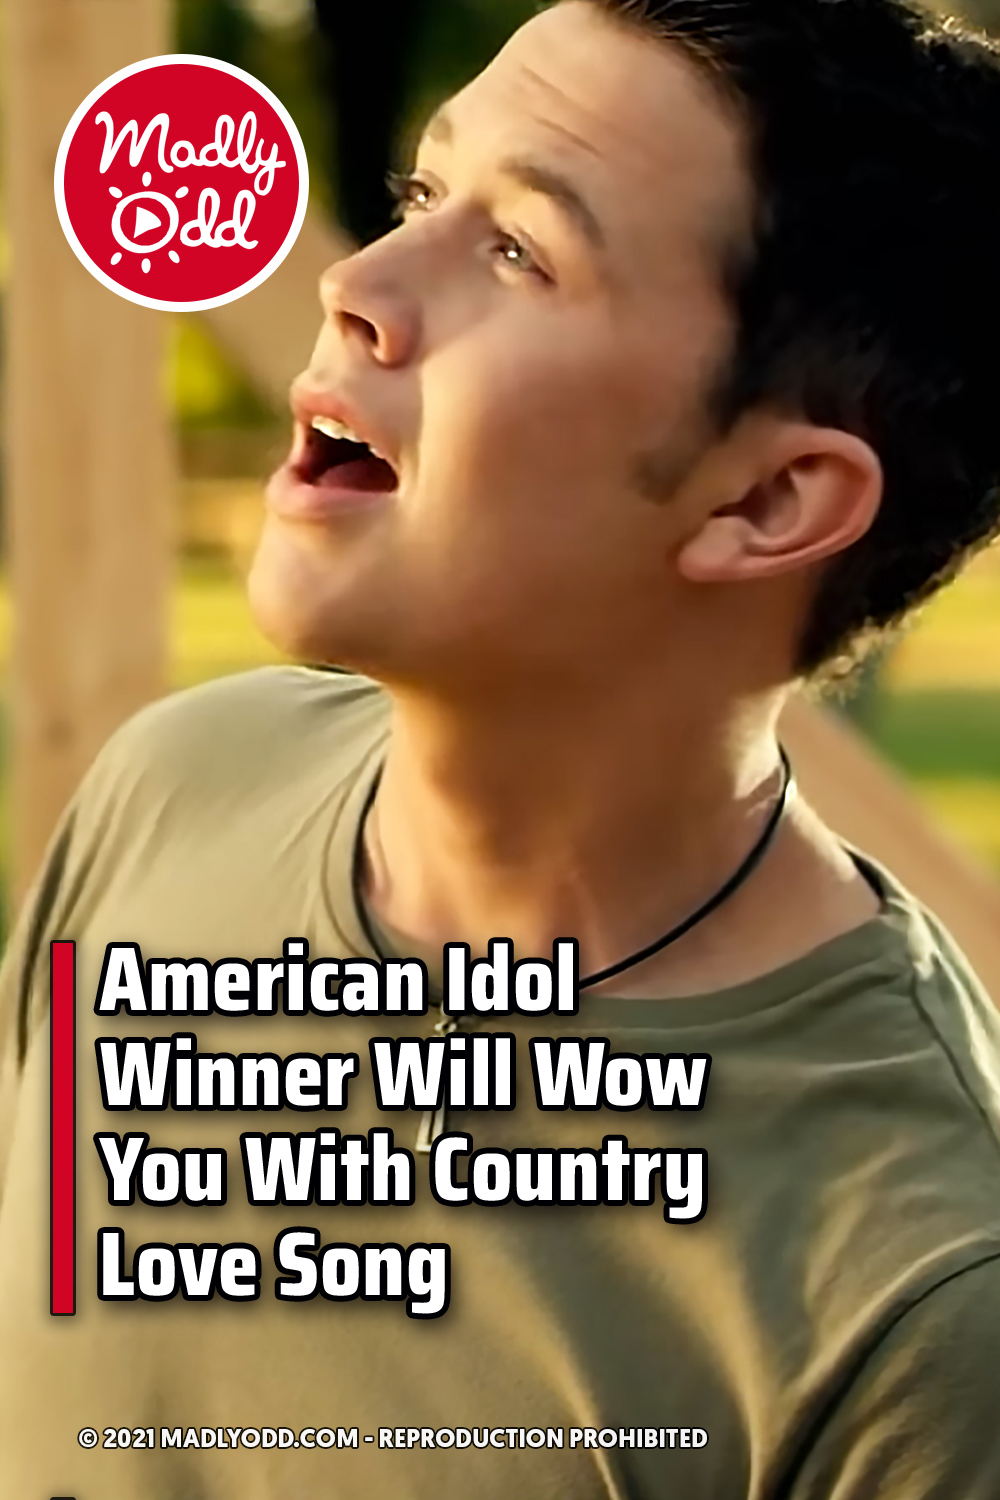 American Idol Winner Will Wow You With Country Love Song